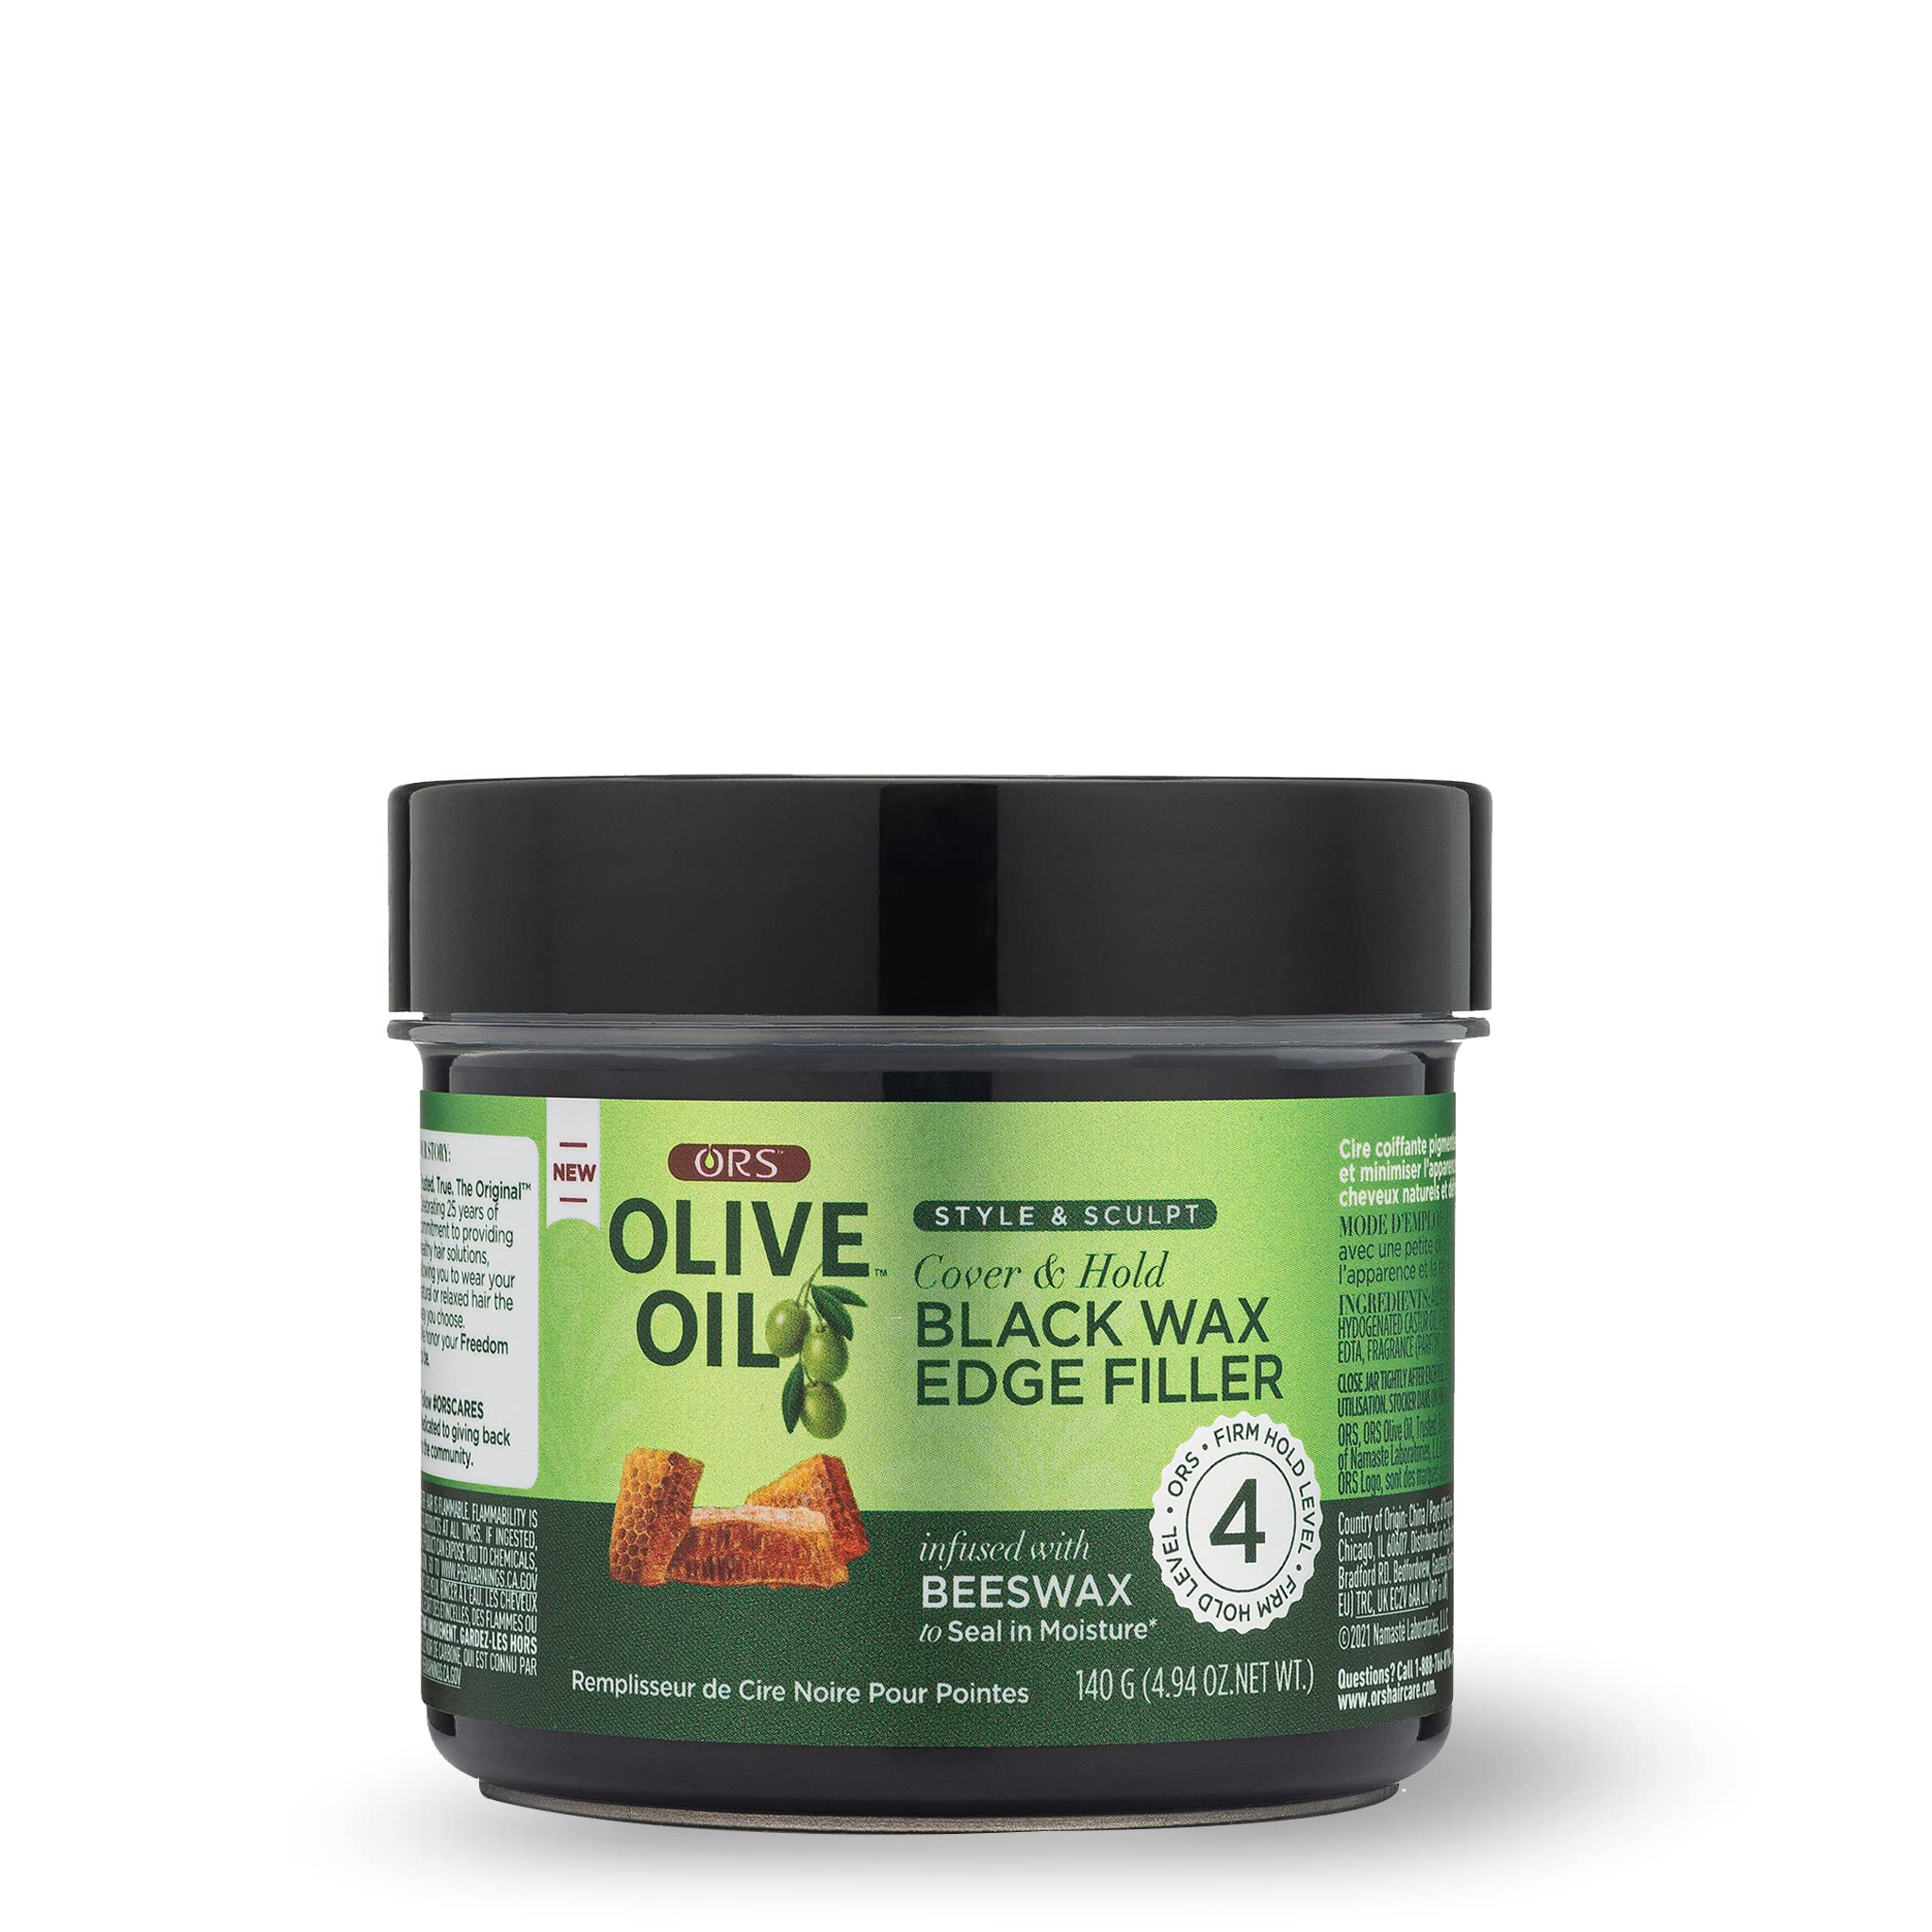 Olive Oil Style & Sculpt Cover & Hold Black Wax Edge Filler Infused with Beeswax to Seal in Moisture (4.9 oz)